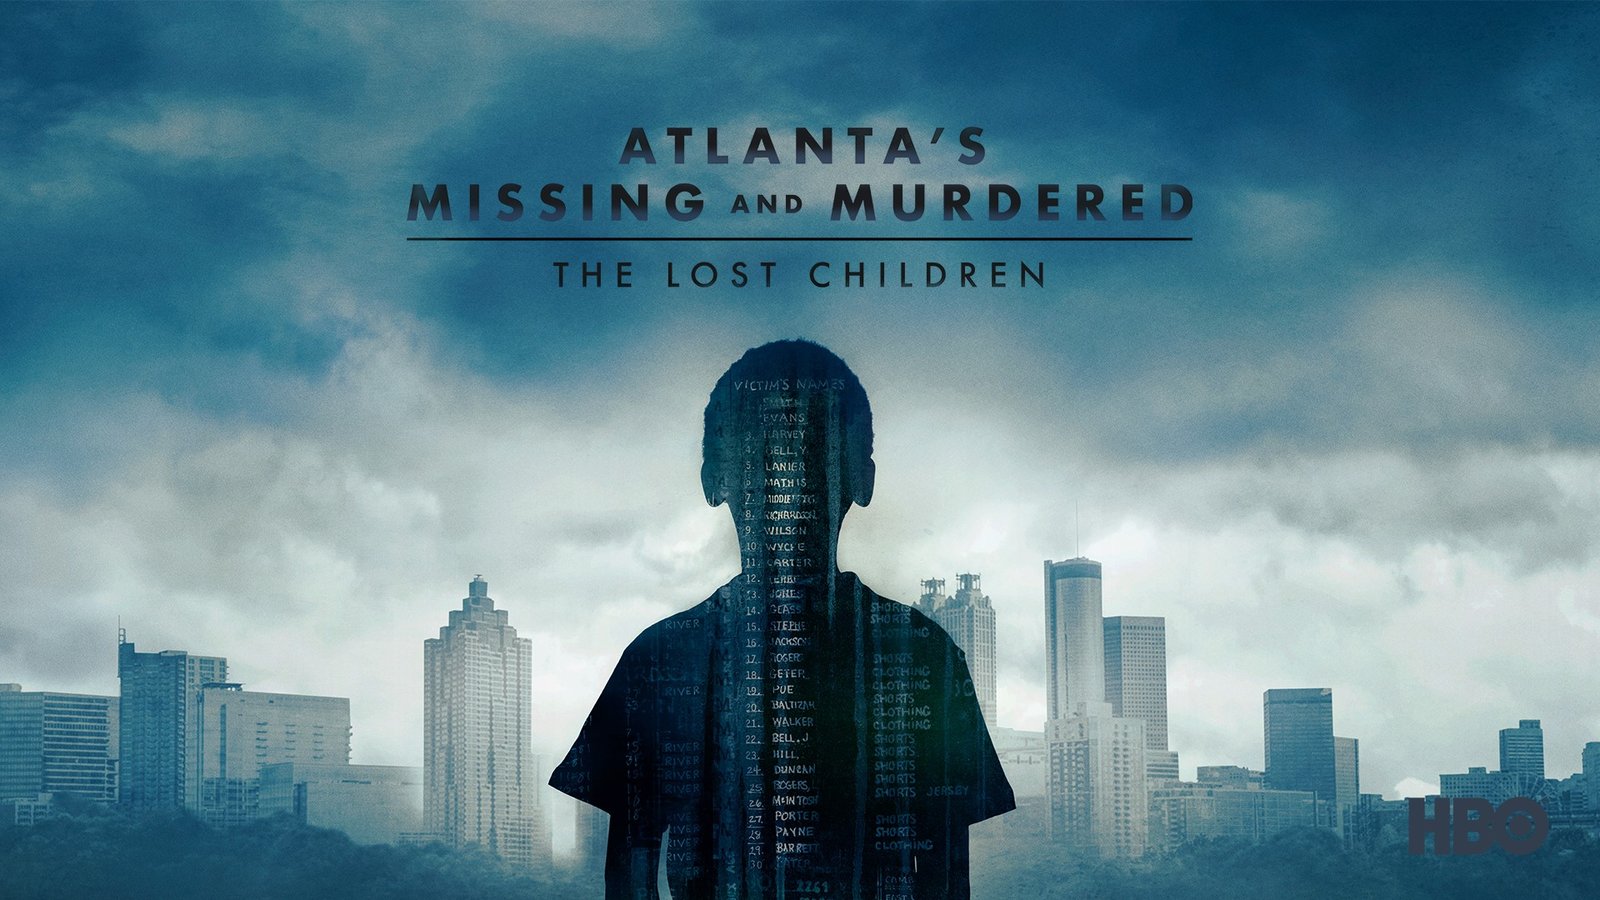 Atlanta’s Missing and Murdered - The Lost Children